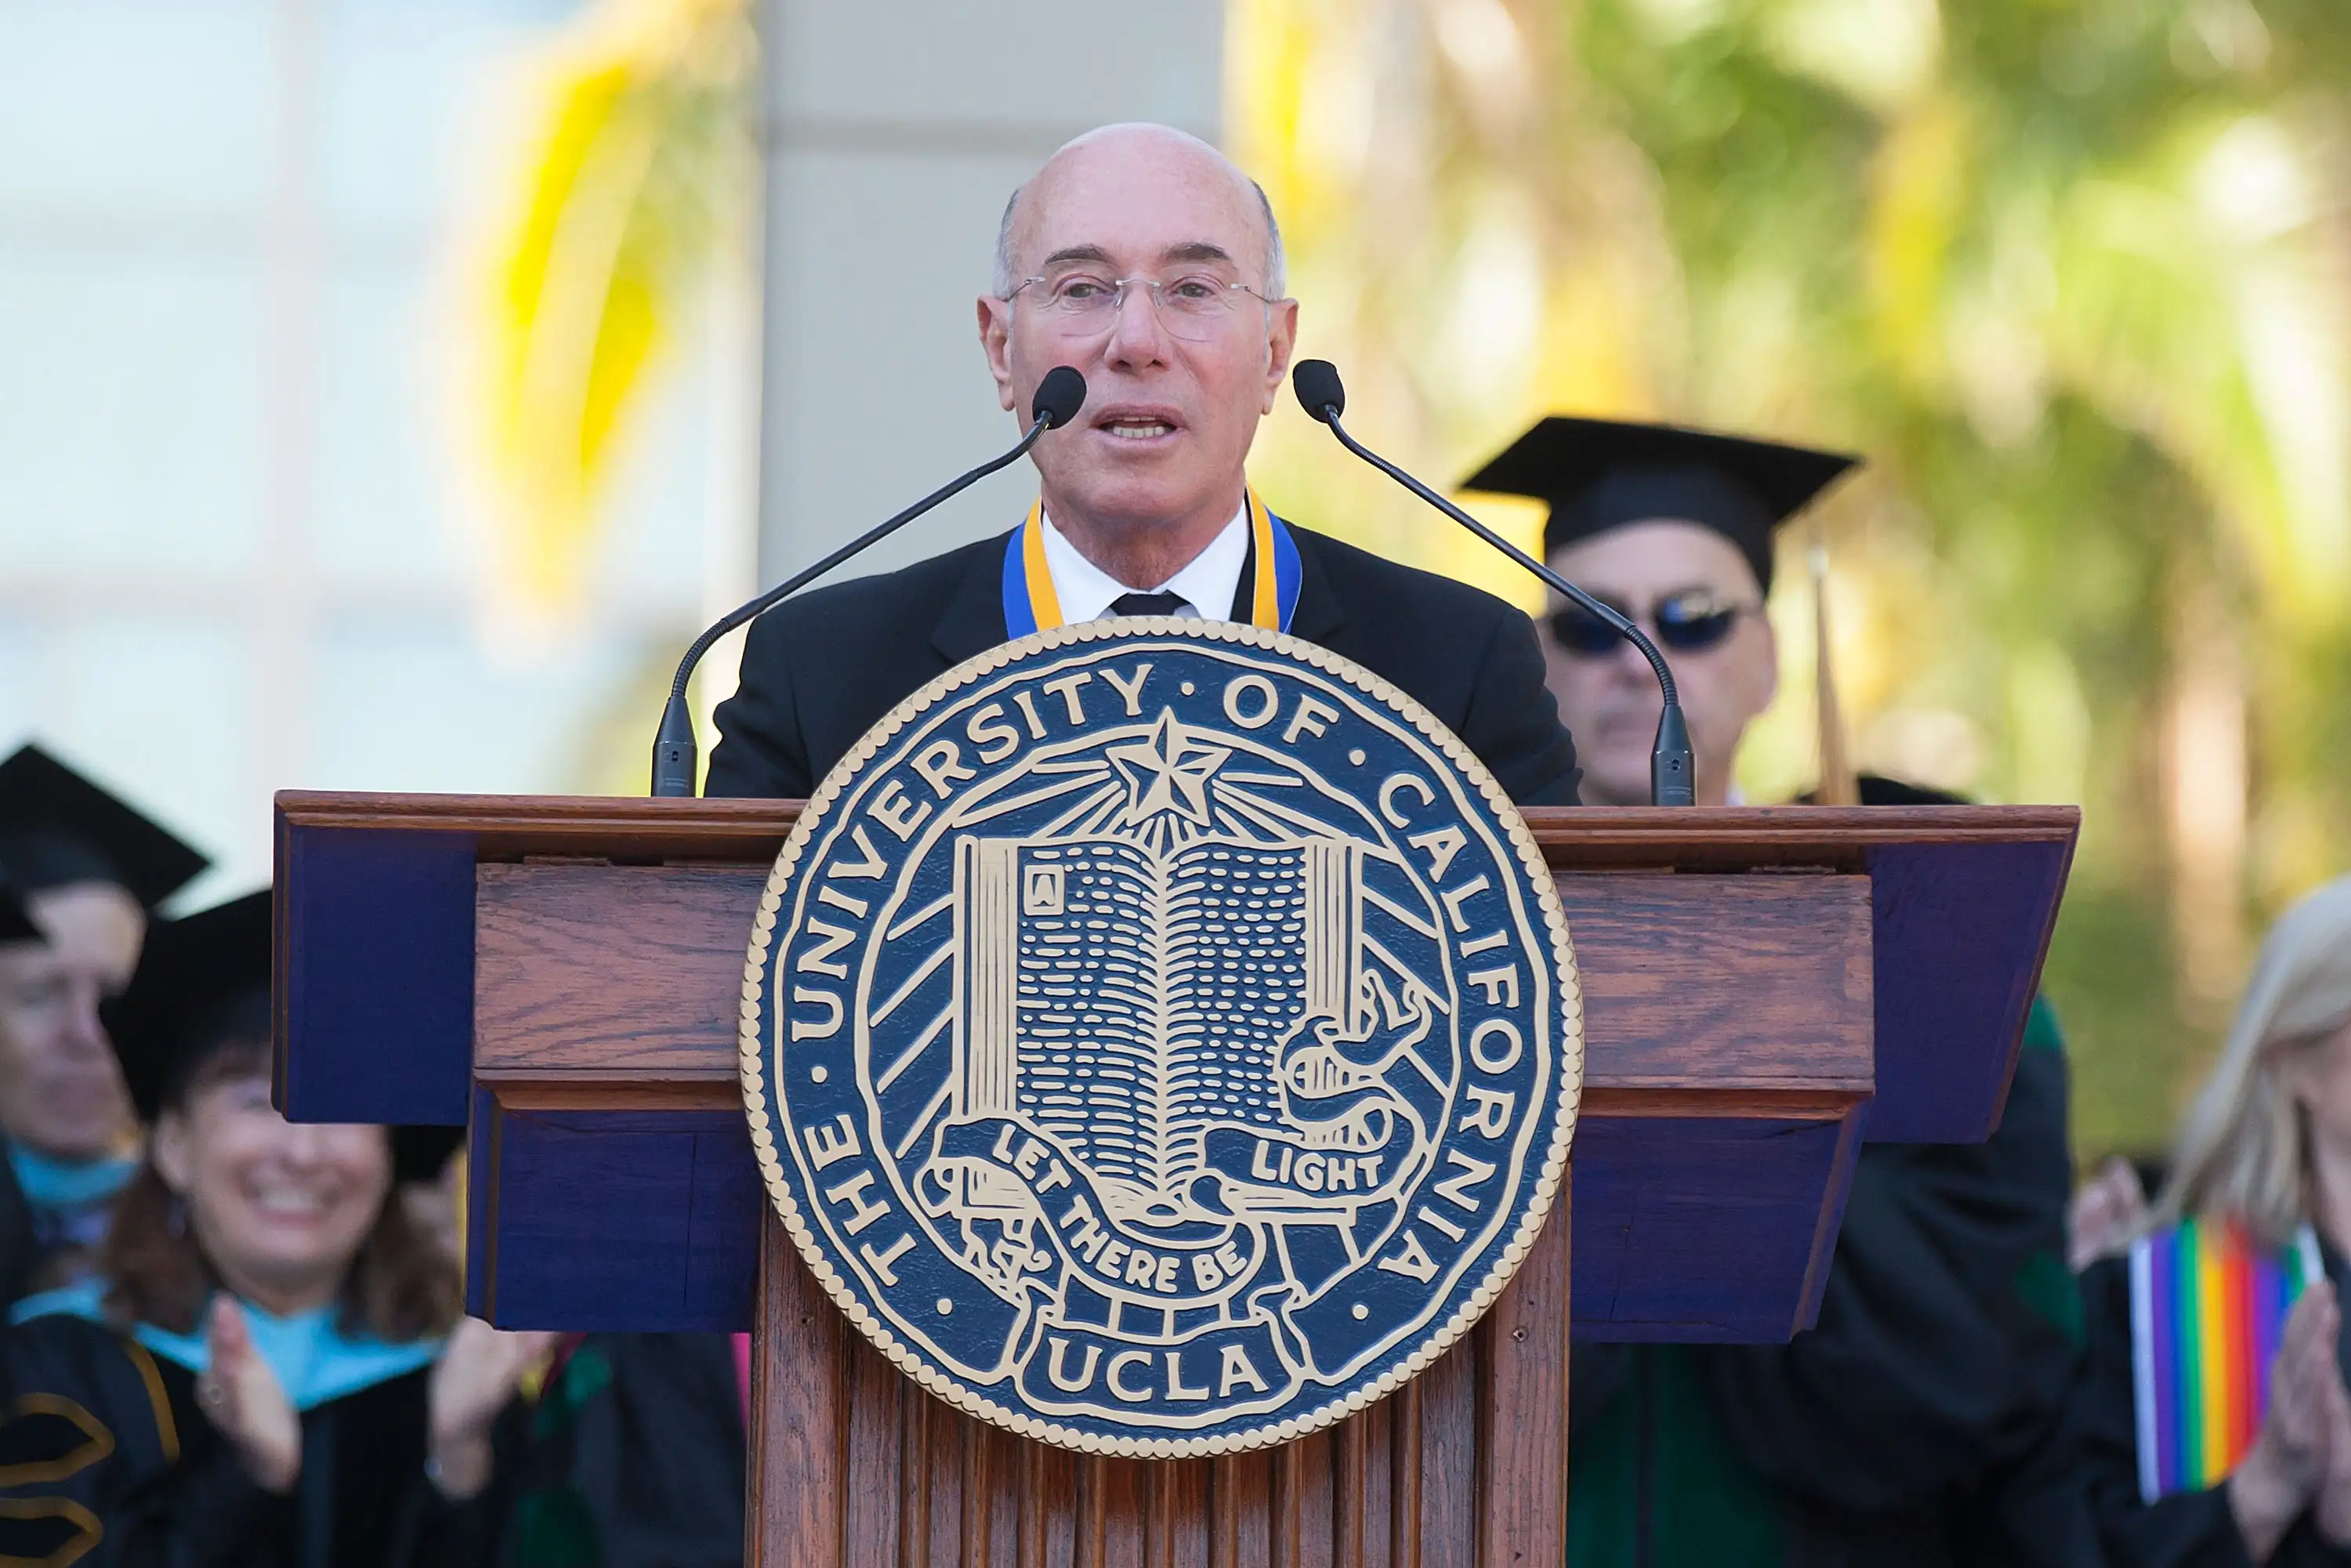 David Geffen Receives The UCLA Medal During UCLA's Hippocratic Oath Ceremony